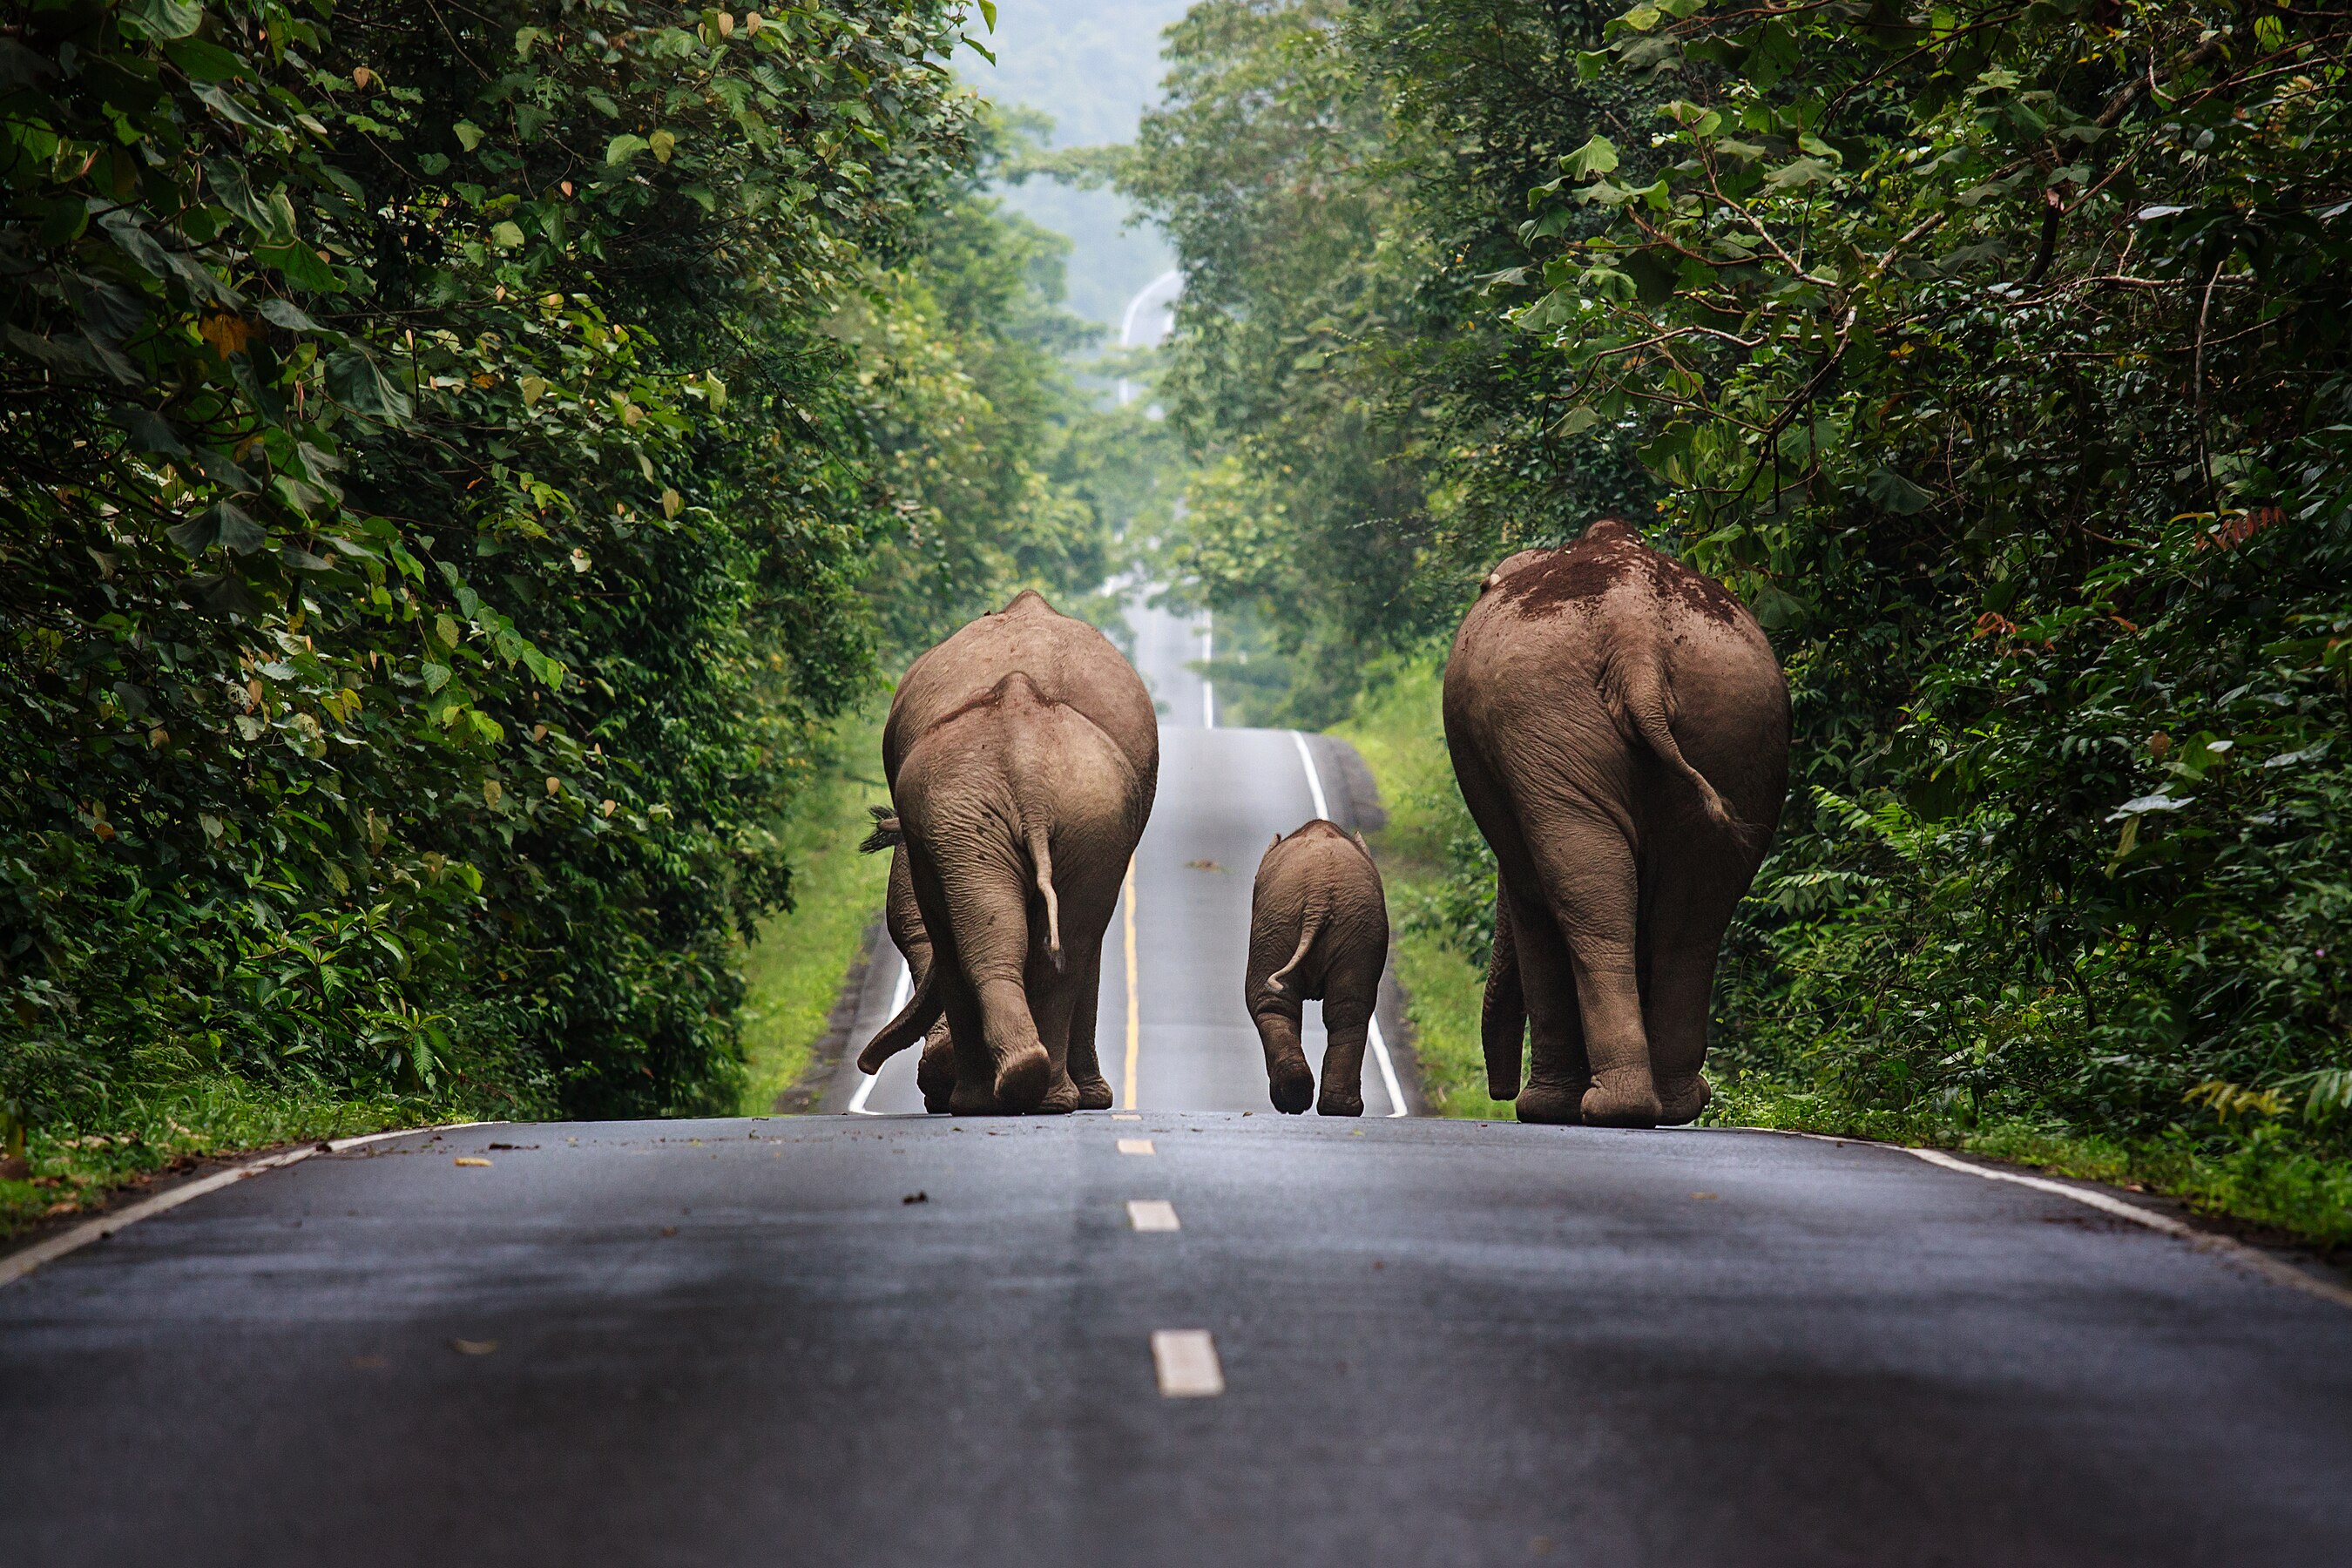 Wild elephants walking up a road in the area of Khao Yai National Park, by Khunkay #5